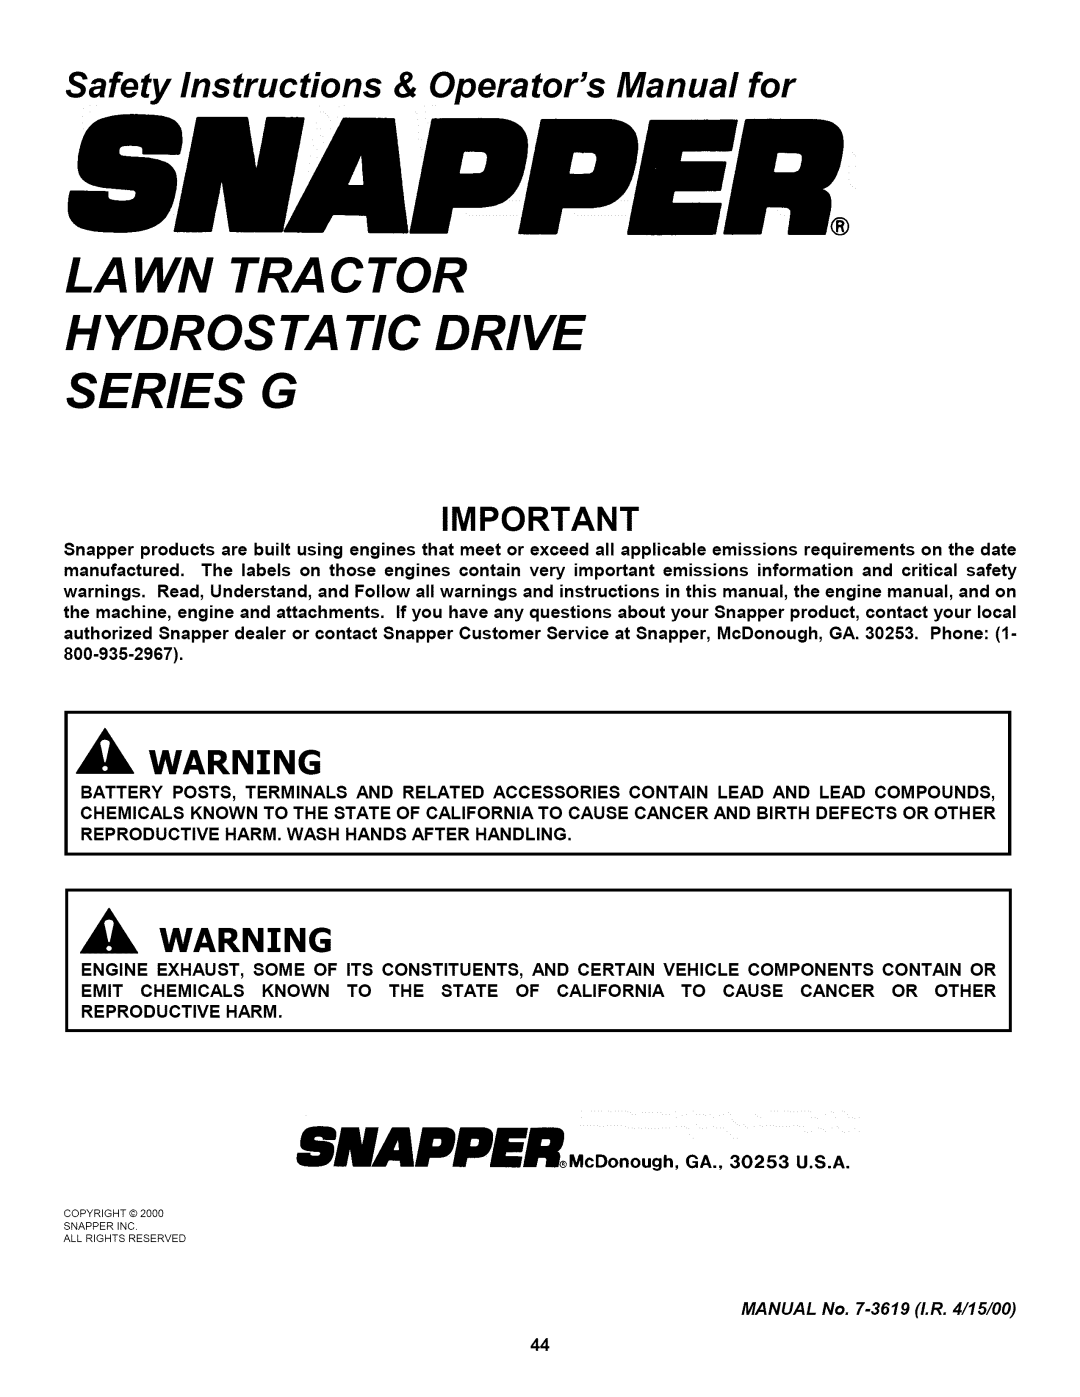 Snapper L T150H38GKV, L T145H33GBV, L T145H38GBV important safety instructions Lawn TRA C TOR Hydrosta TIC Drive Series G 